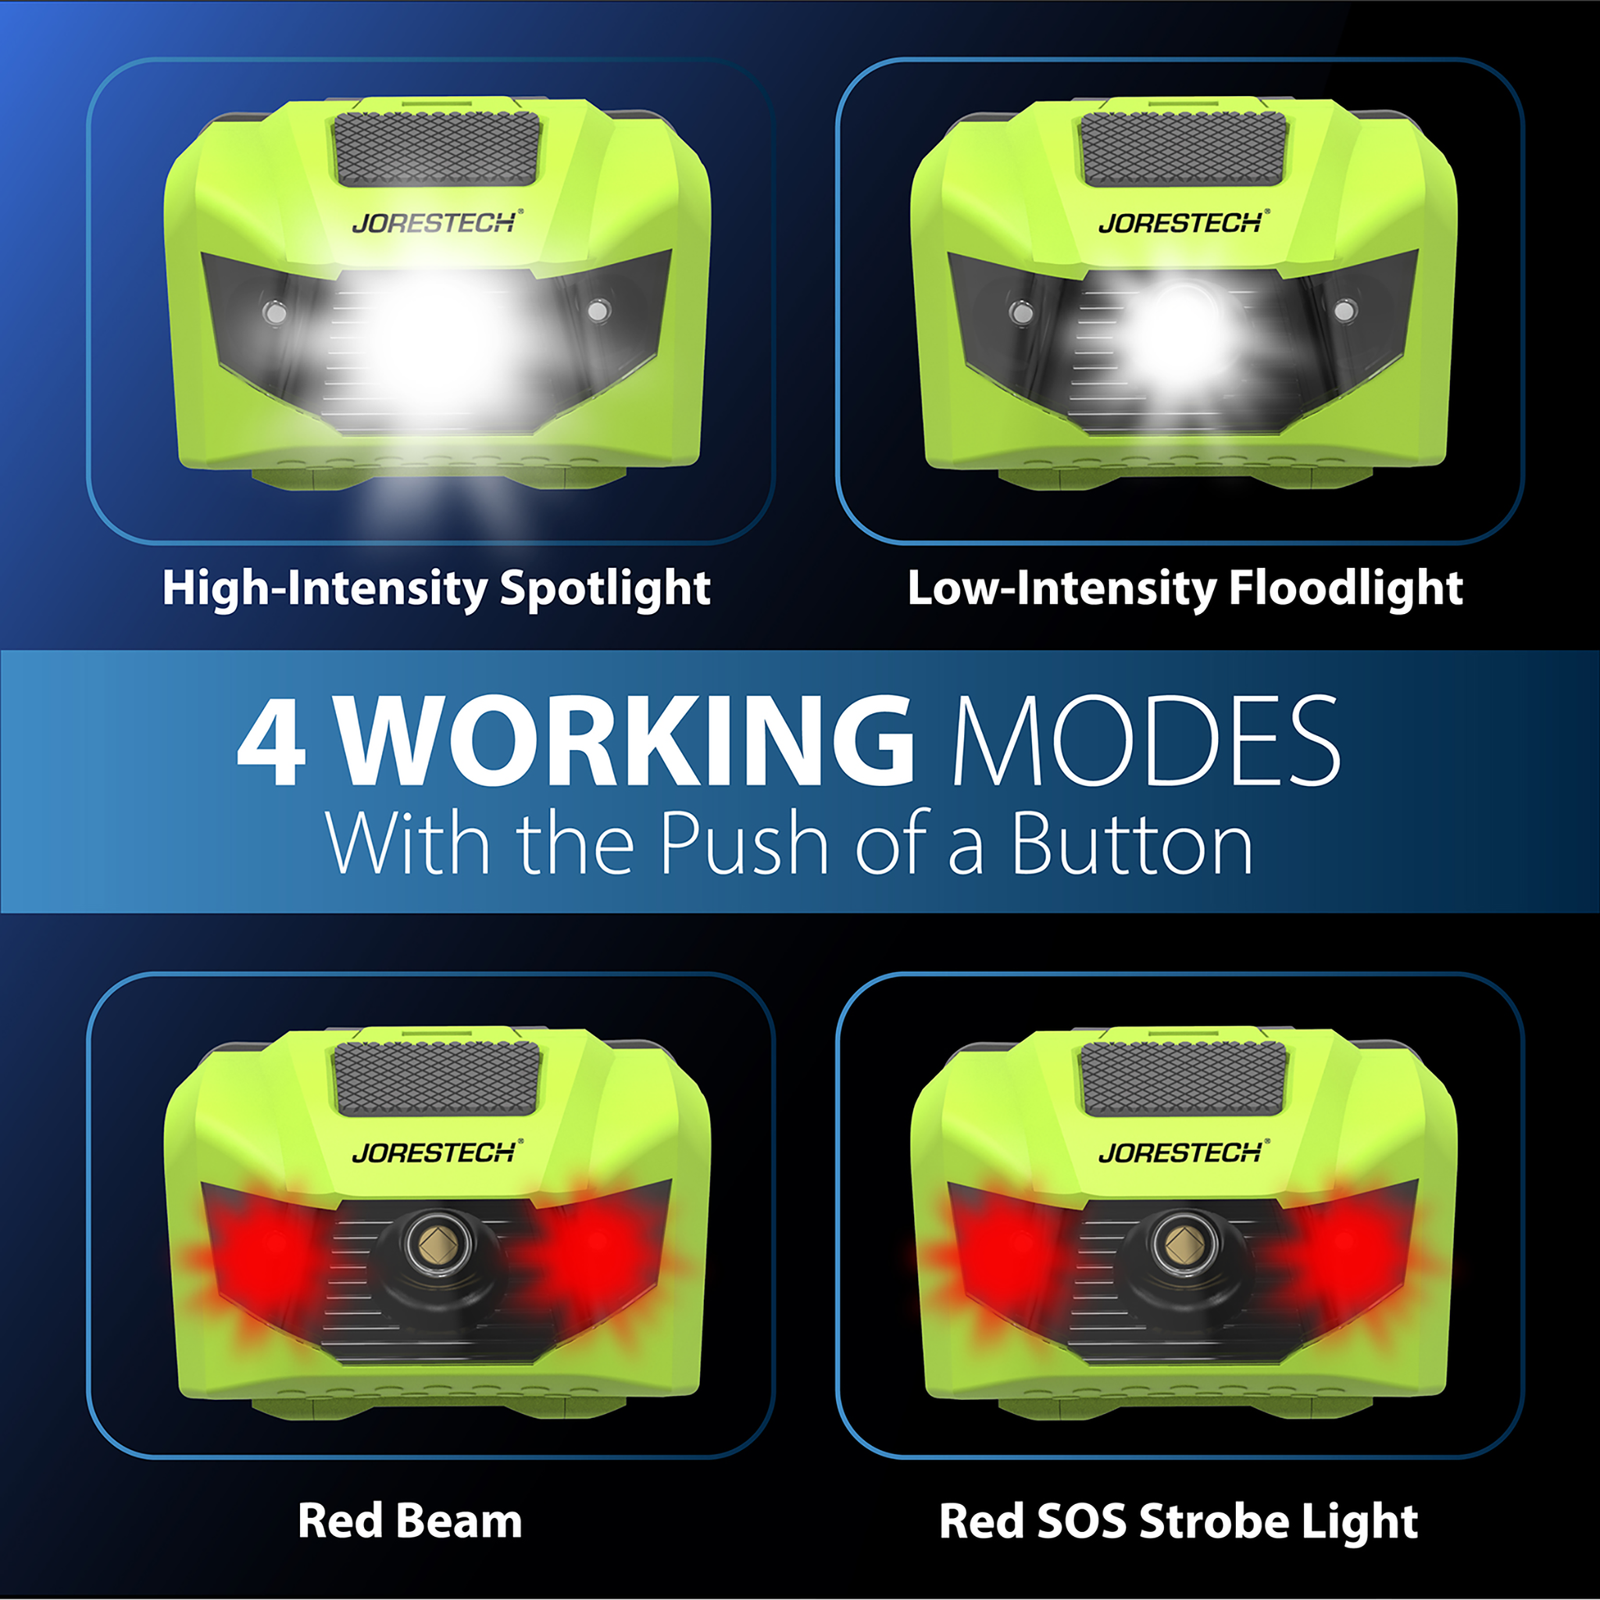 Show 4 different modes of light that the JORESTECH lamp has: High intensity spotlight, Low intensity floodlight, red beam and red SOS stroke light